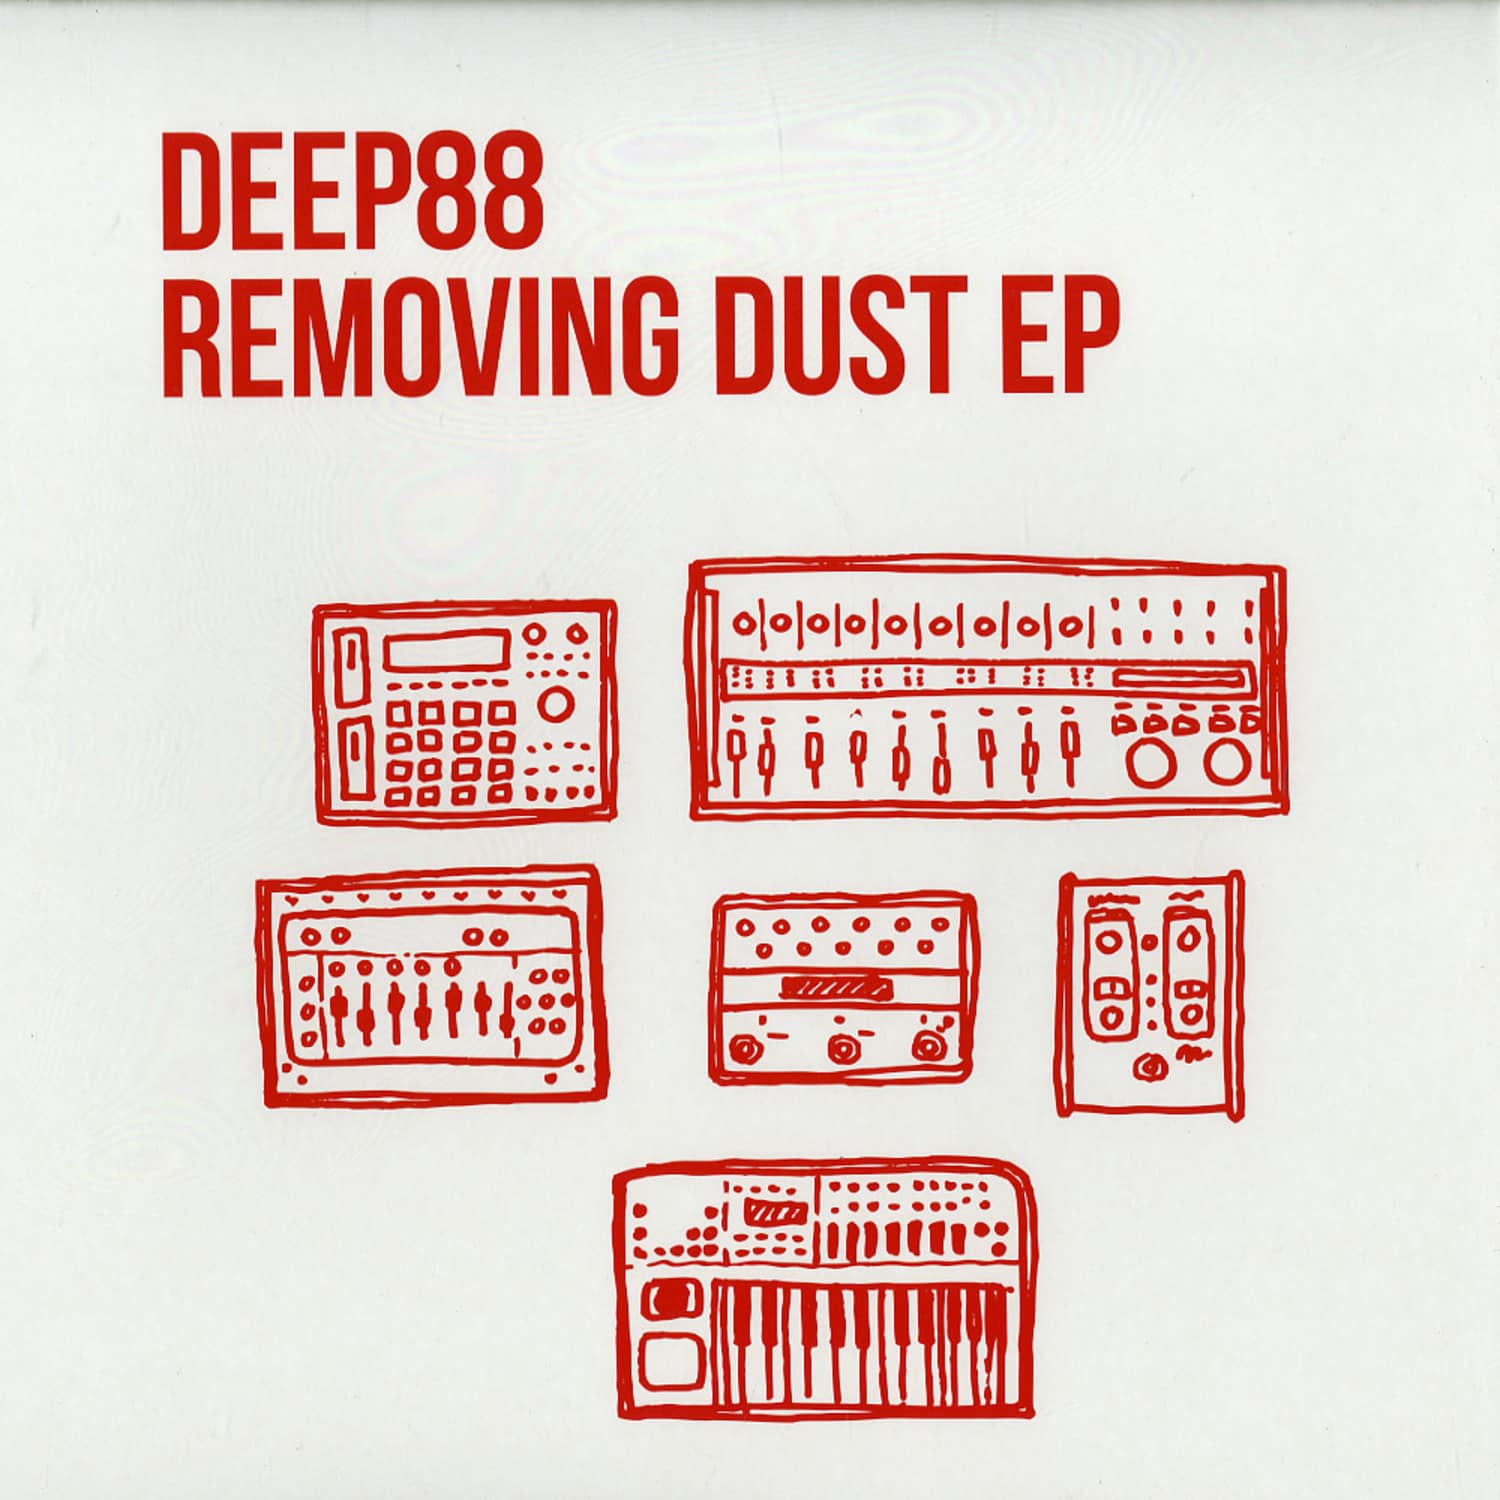 Deep88 - REMOVING DUST EP